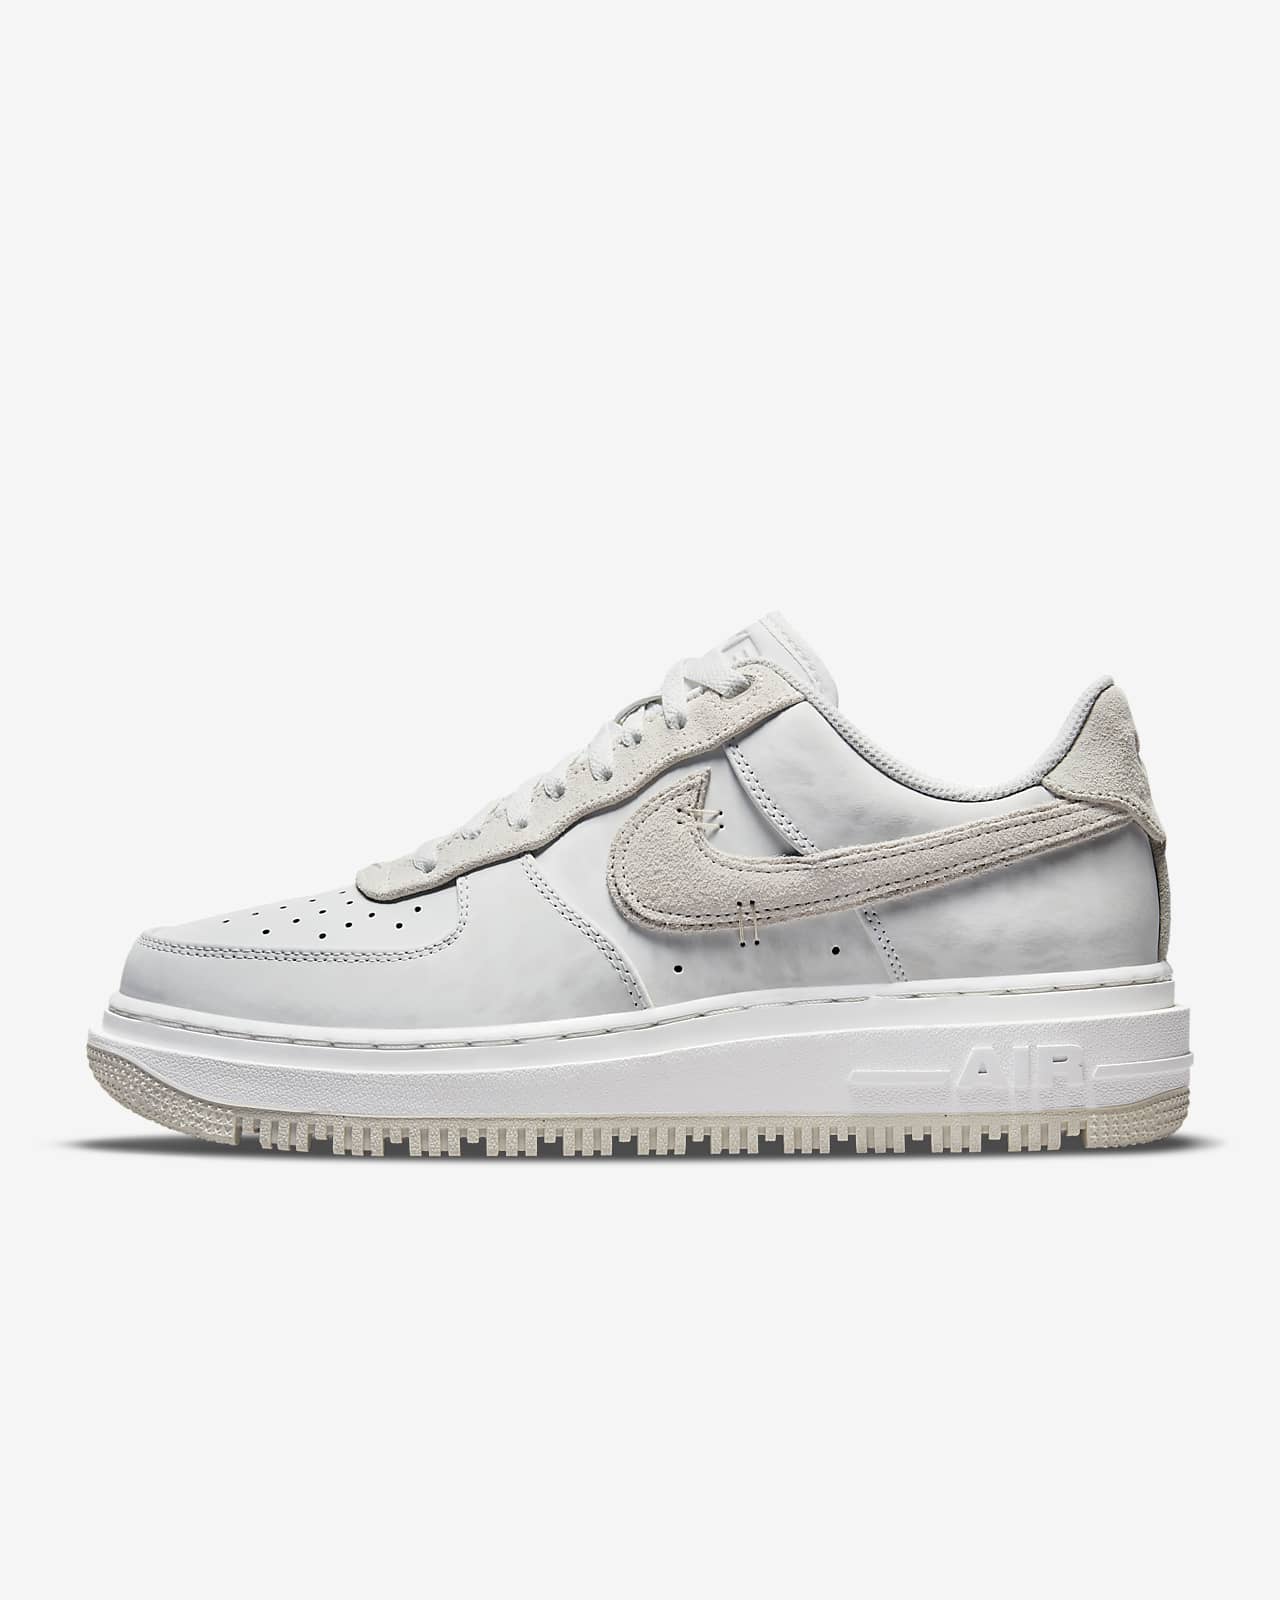 In important Should Nike Air Force 1 Luxe Men's Shoes. Nike.com